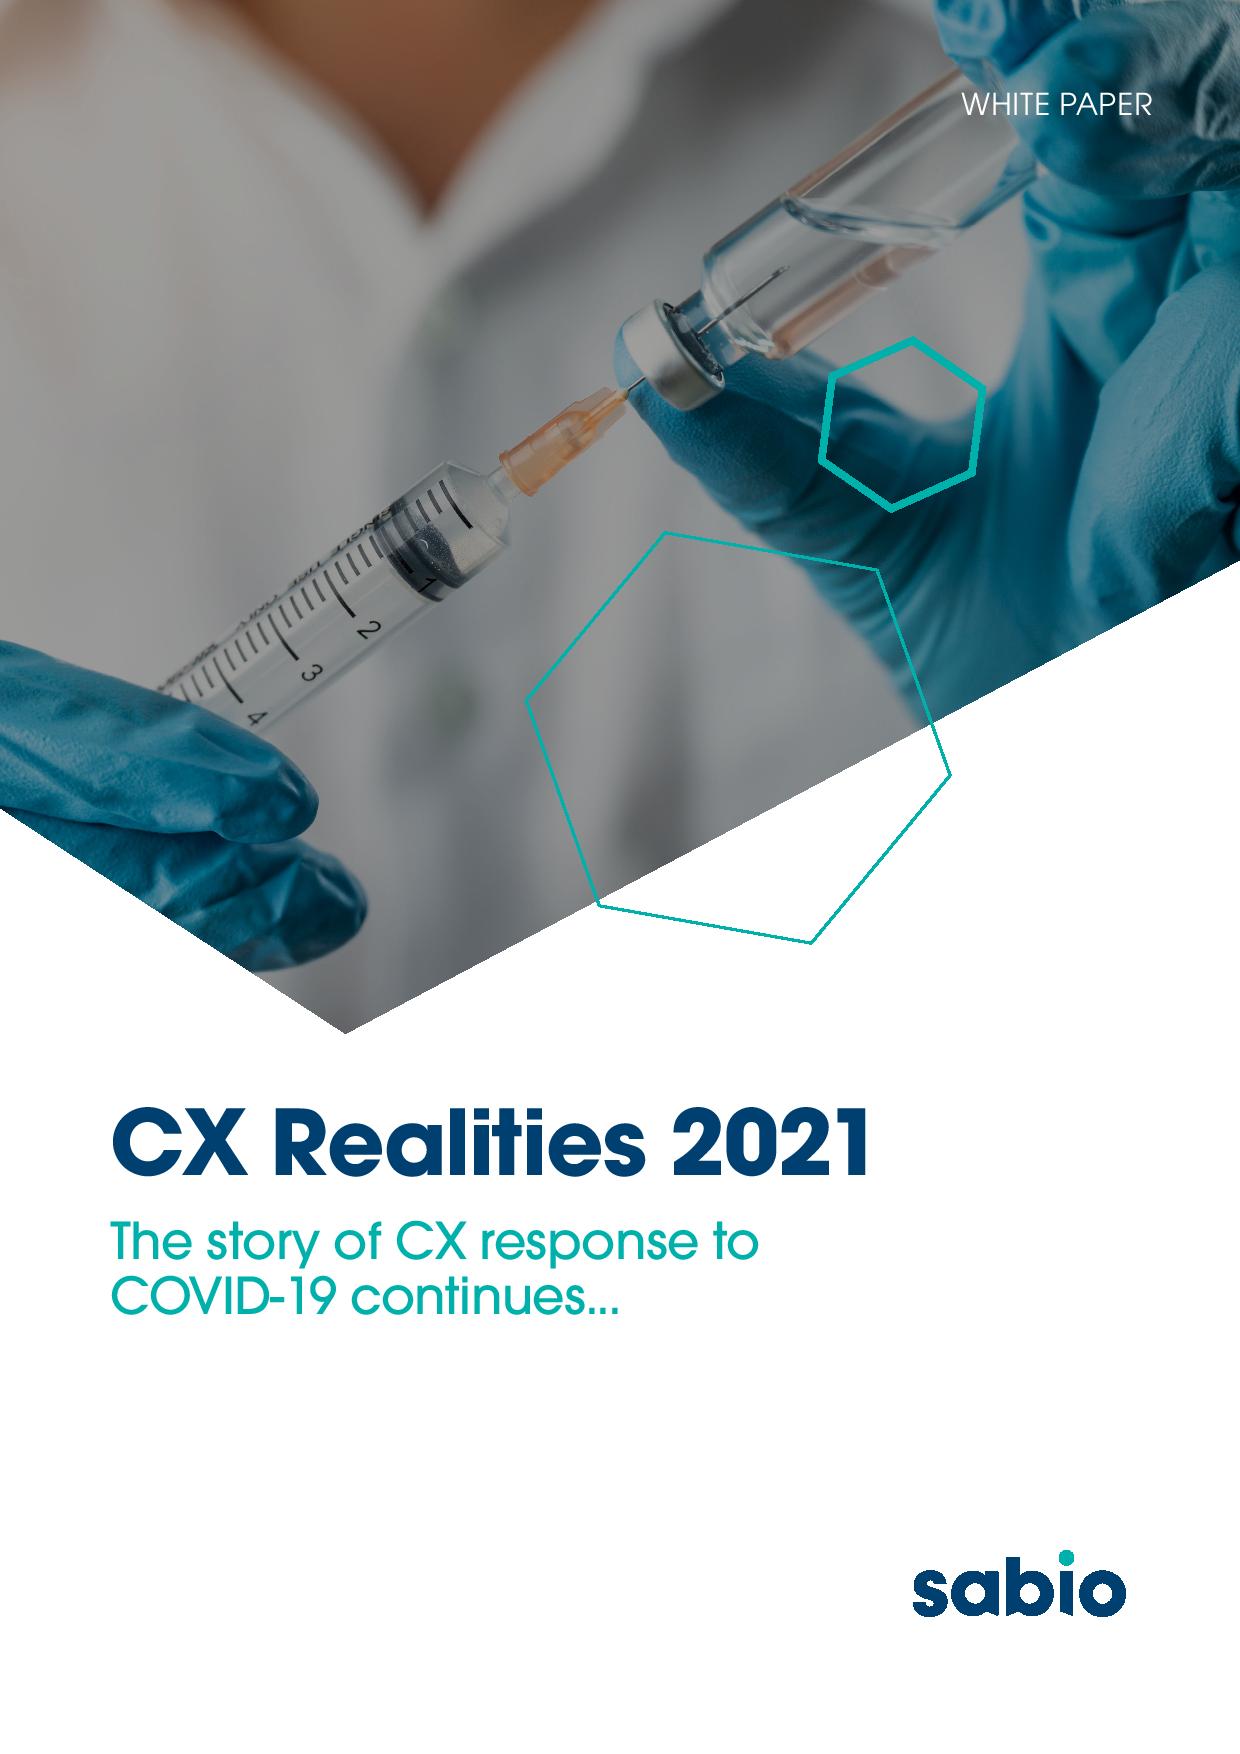 CX  Realities 2021 - The story of CX response to COVID-19 continues...